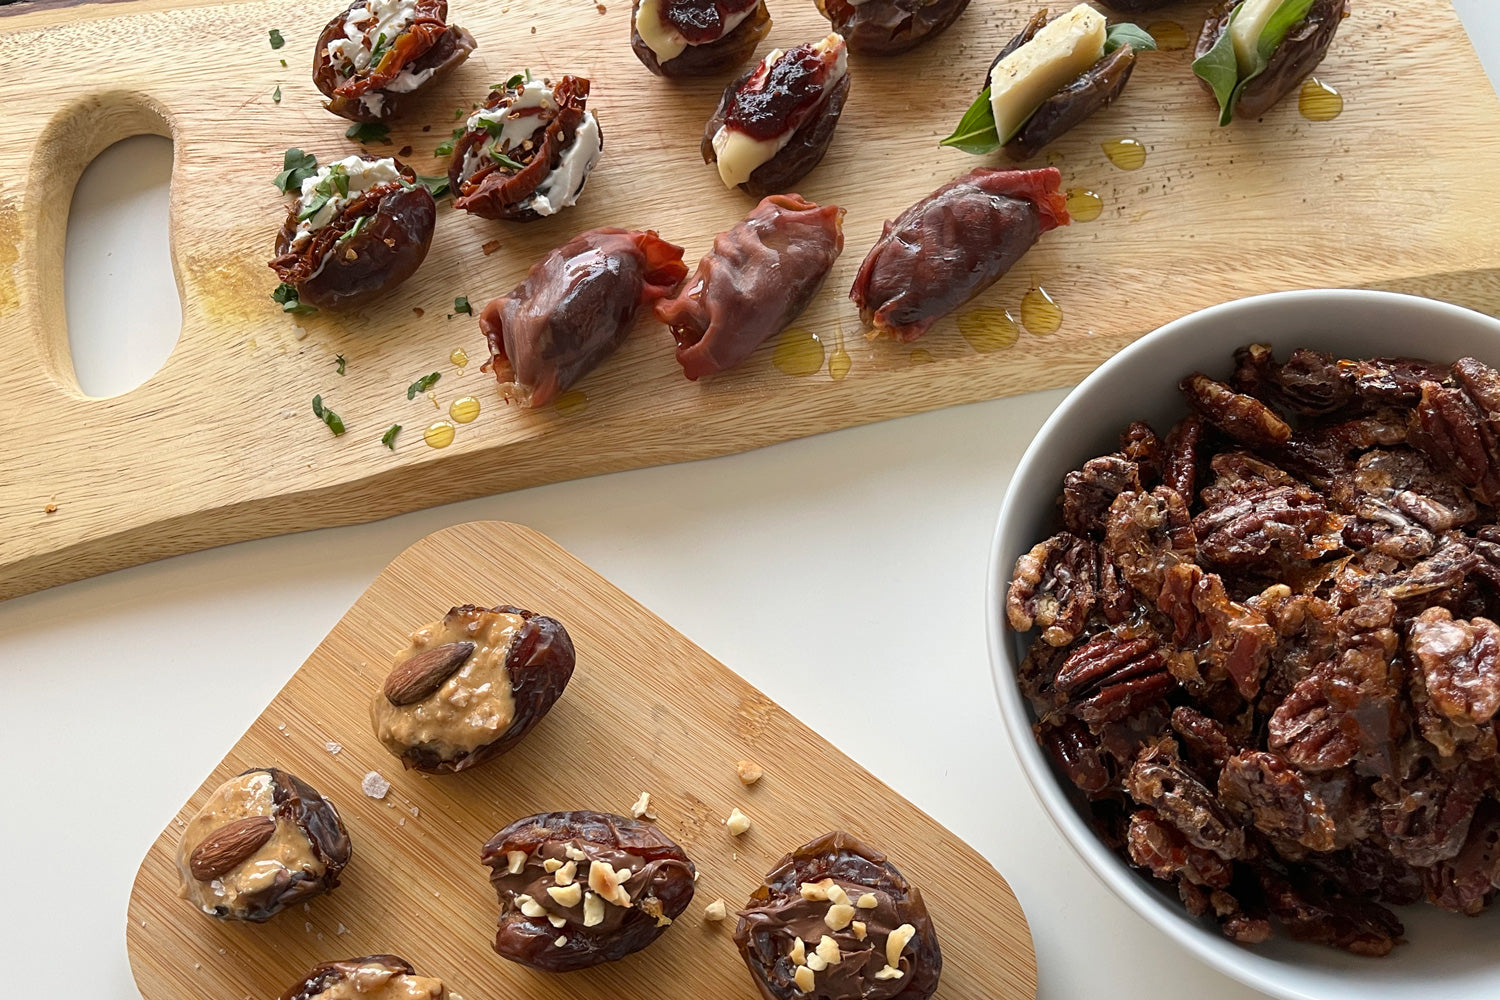 Festive snacking made healthy, quick & easy